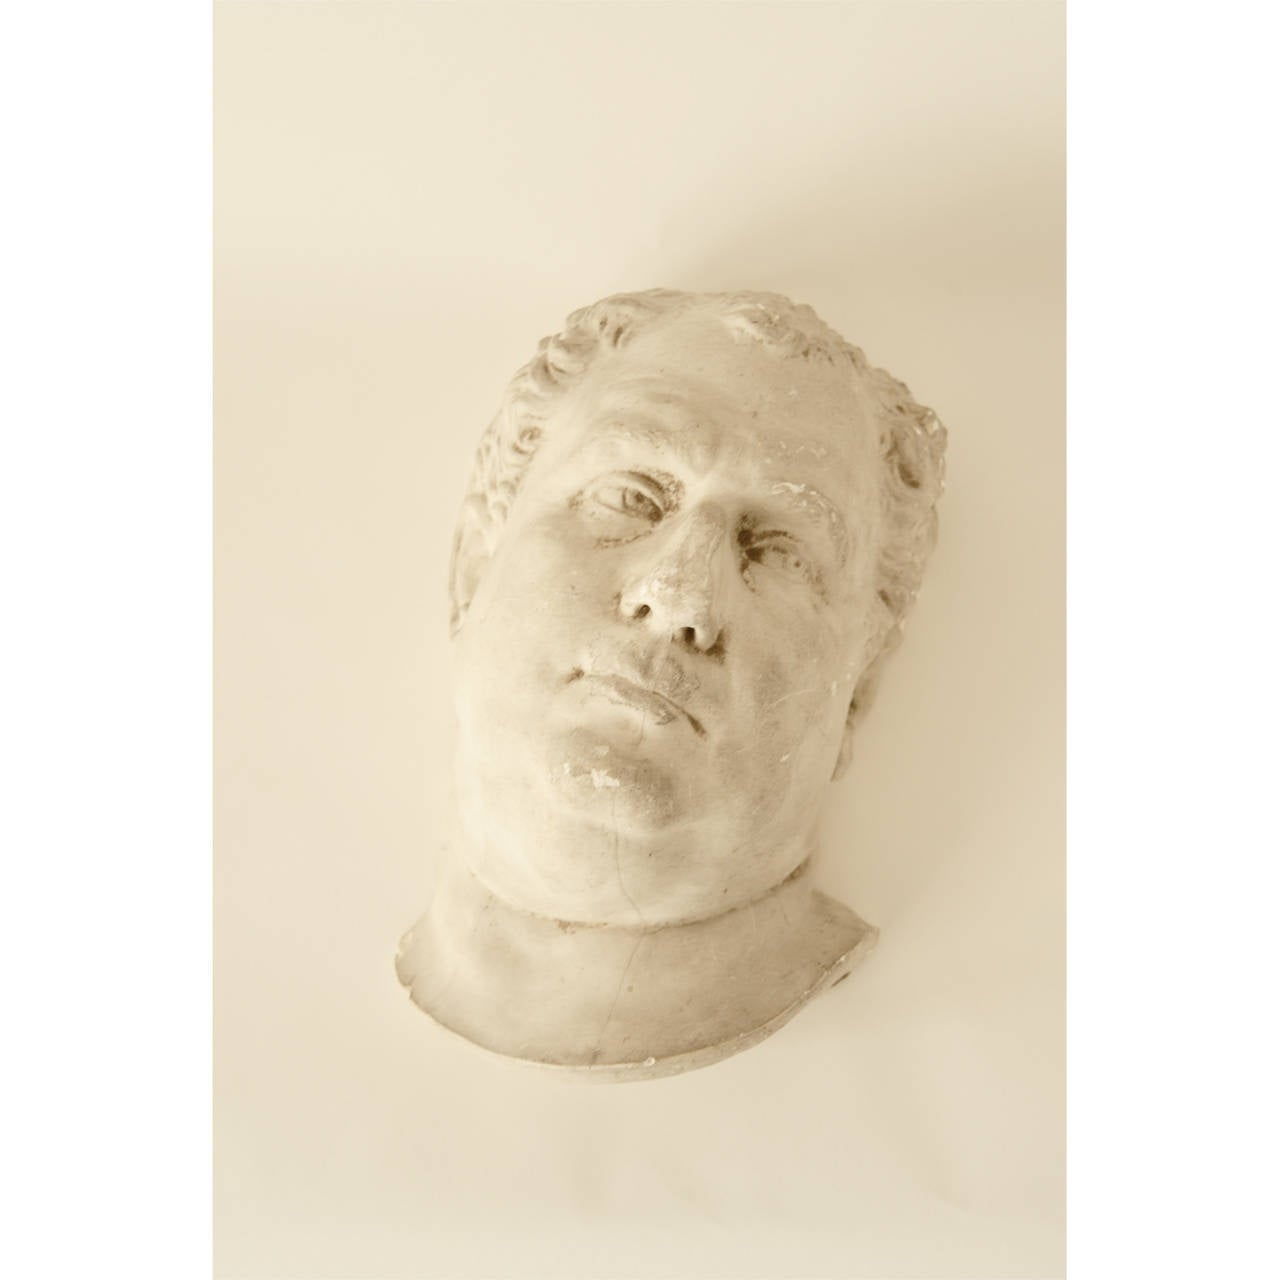 Early 20th Century Cast Plaster Wall Hanging of a Man's Face. Distressed Aesthetic.